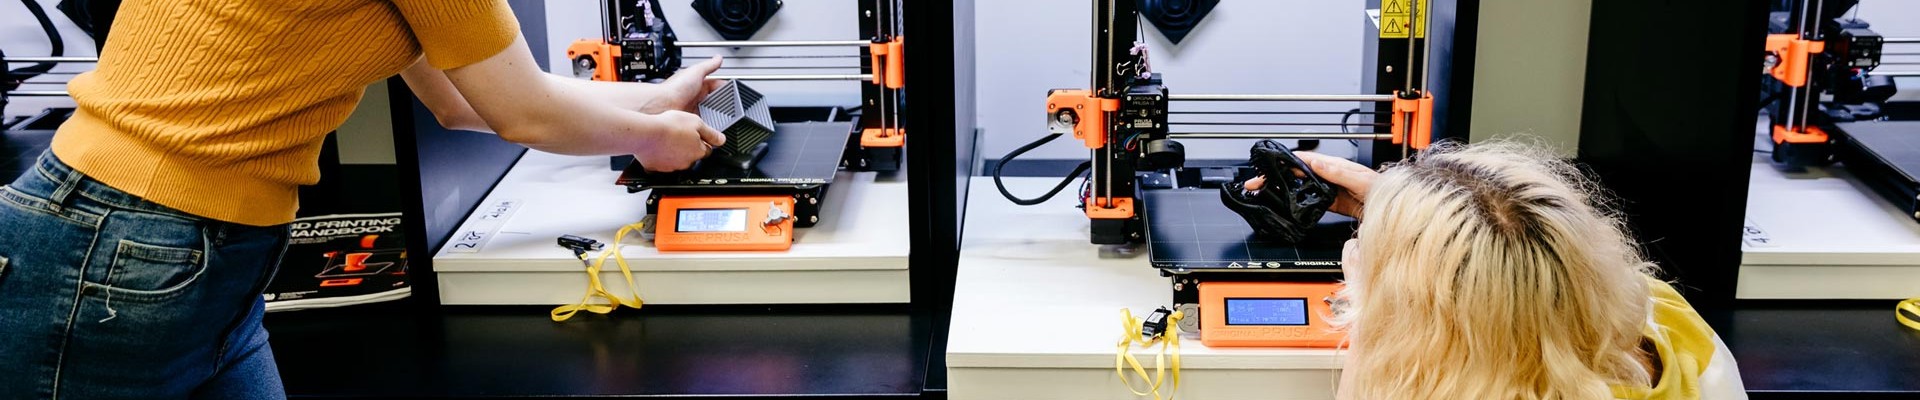 Two people using 3D printers One person is crouched down examining a creation and the other is standing 